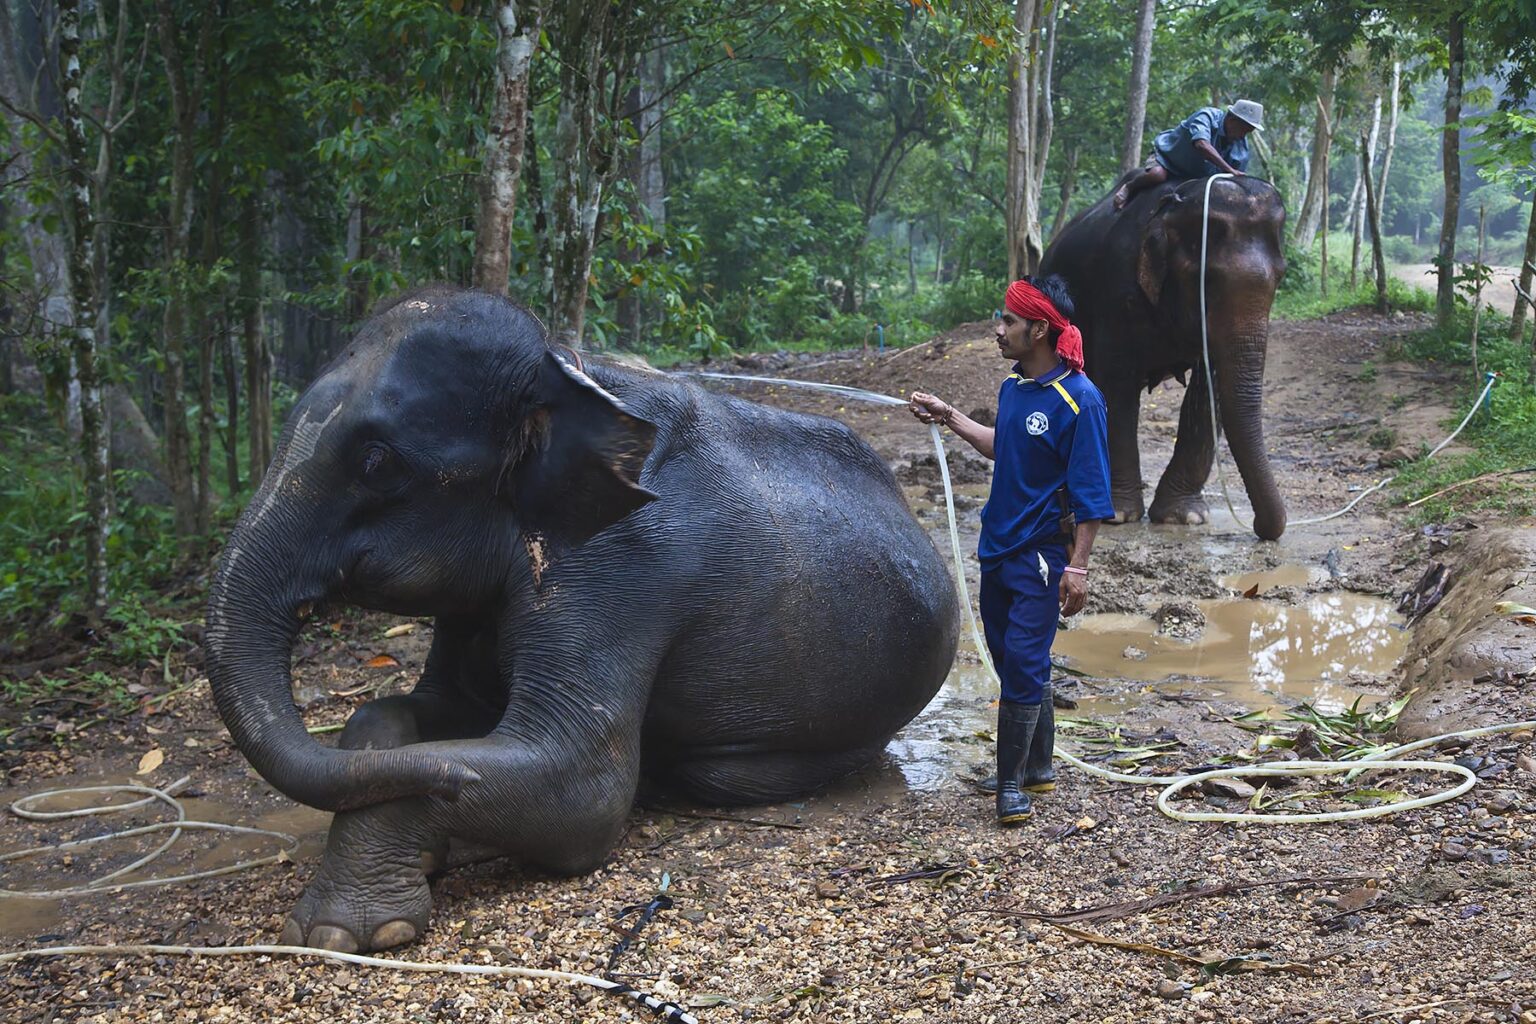 MAHOUTS wash their elephants each day before the guest arrive near KHAO SOK NATIONAL PARK - SURAI THANI PROVENCE, THAILAND